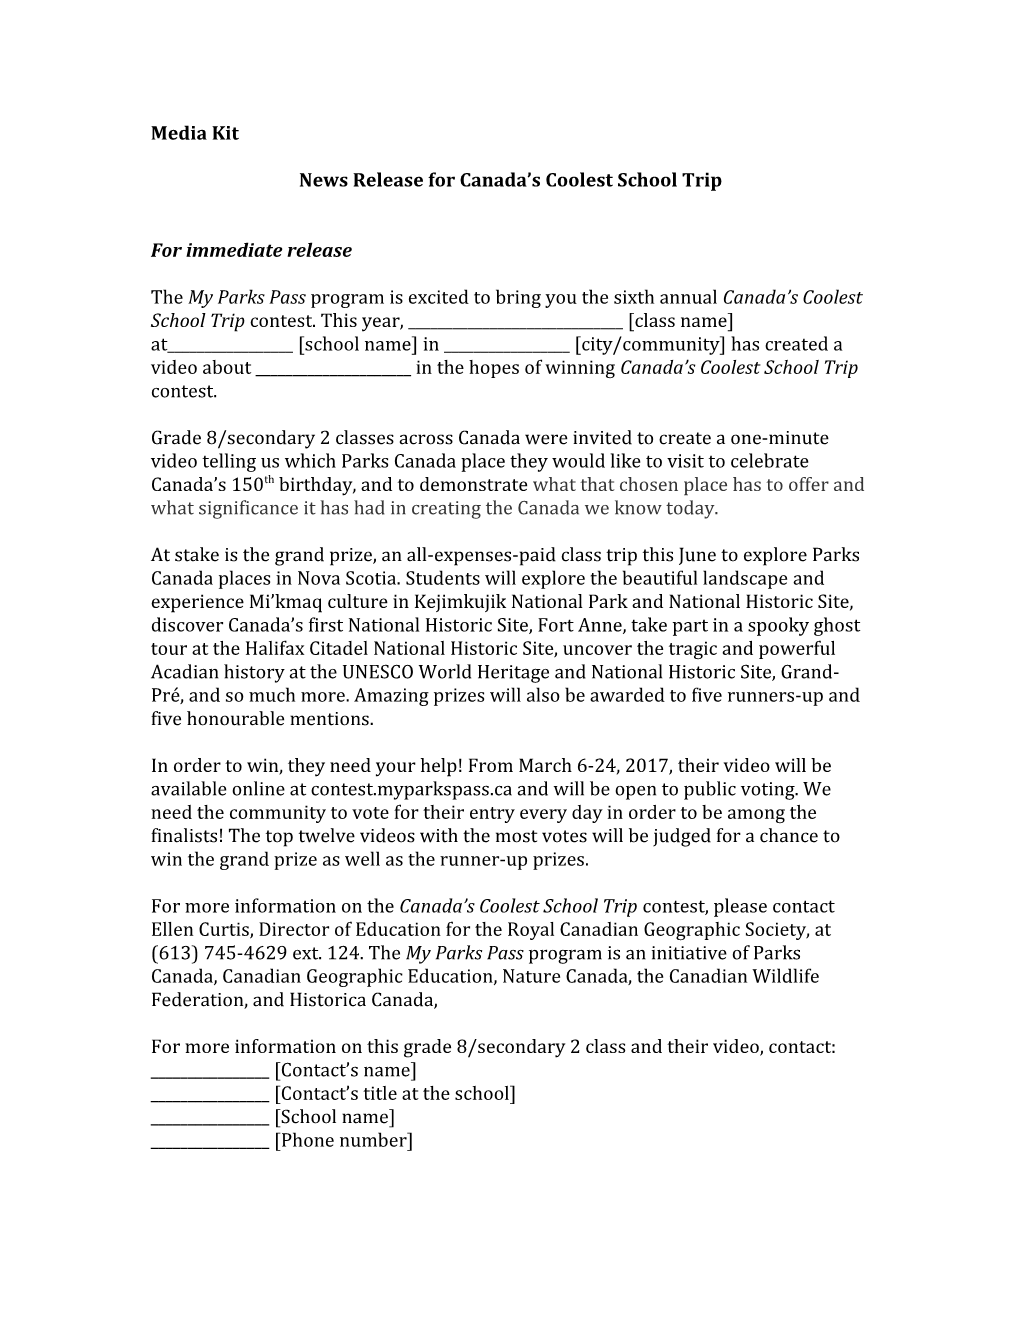 News Release for Canada S Coolest School Trip